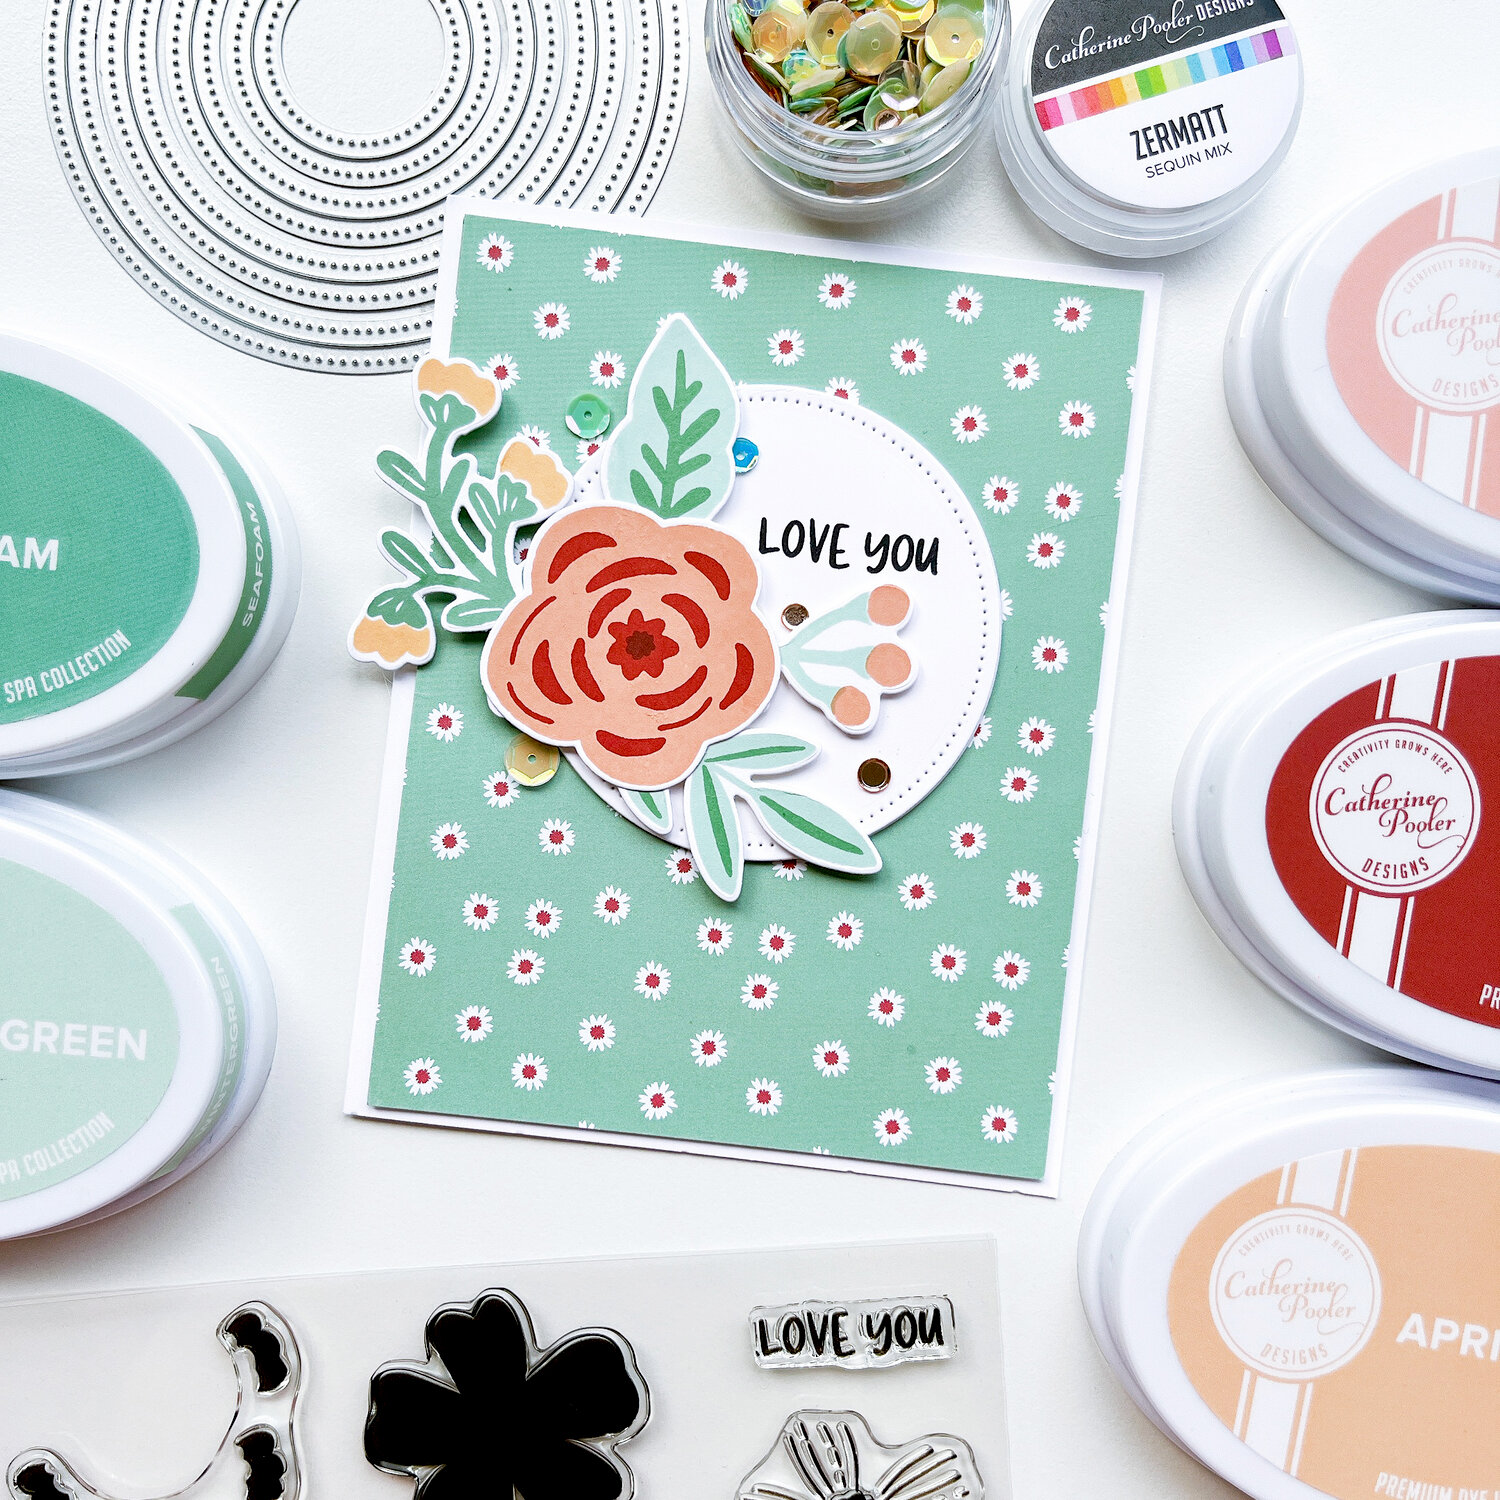 👀 LAST CHANCE to Shop the Die Cutting Sale! - Scrapbook